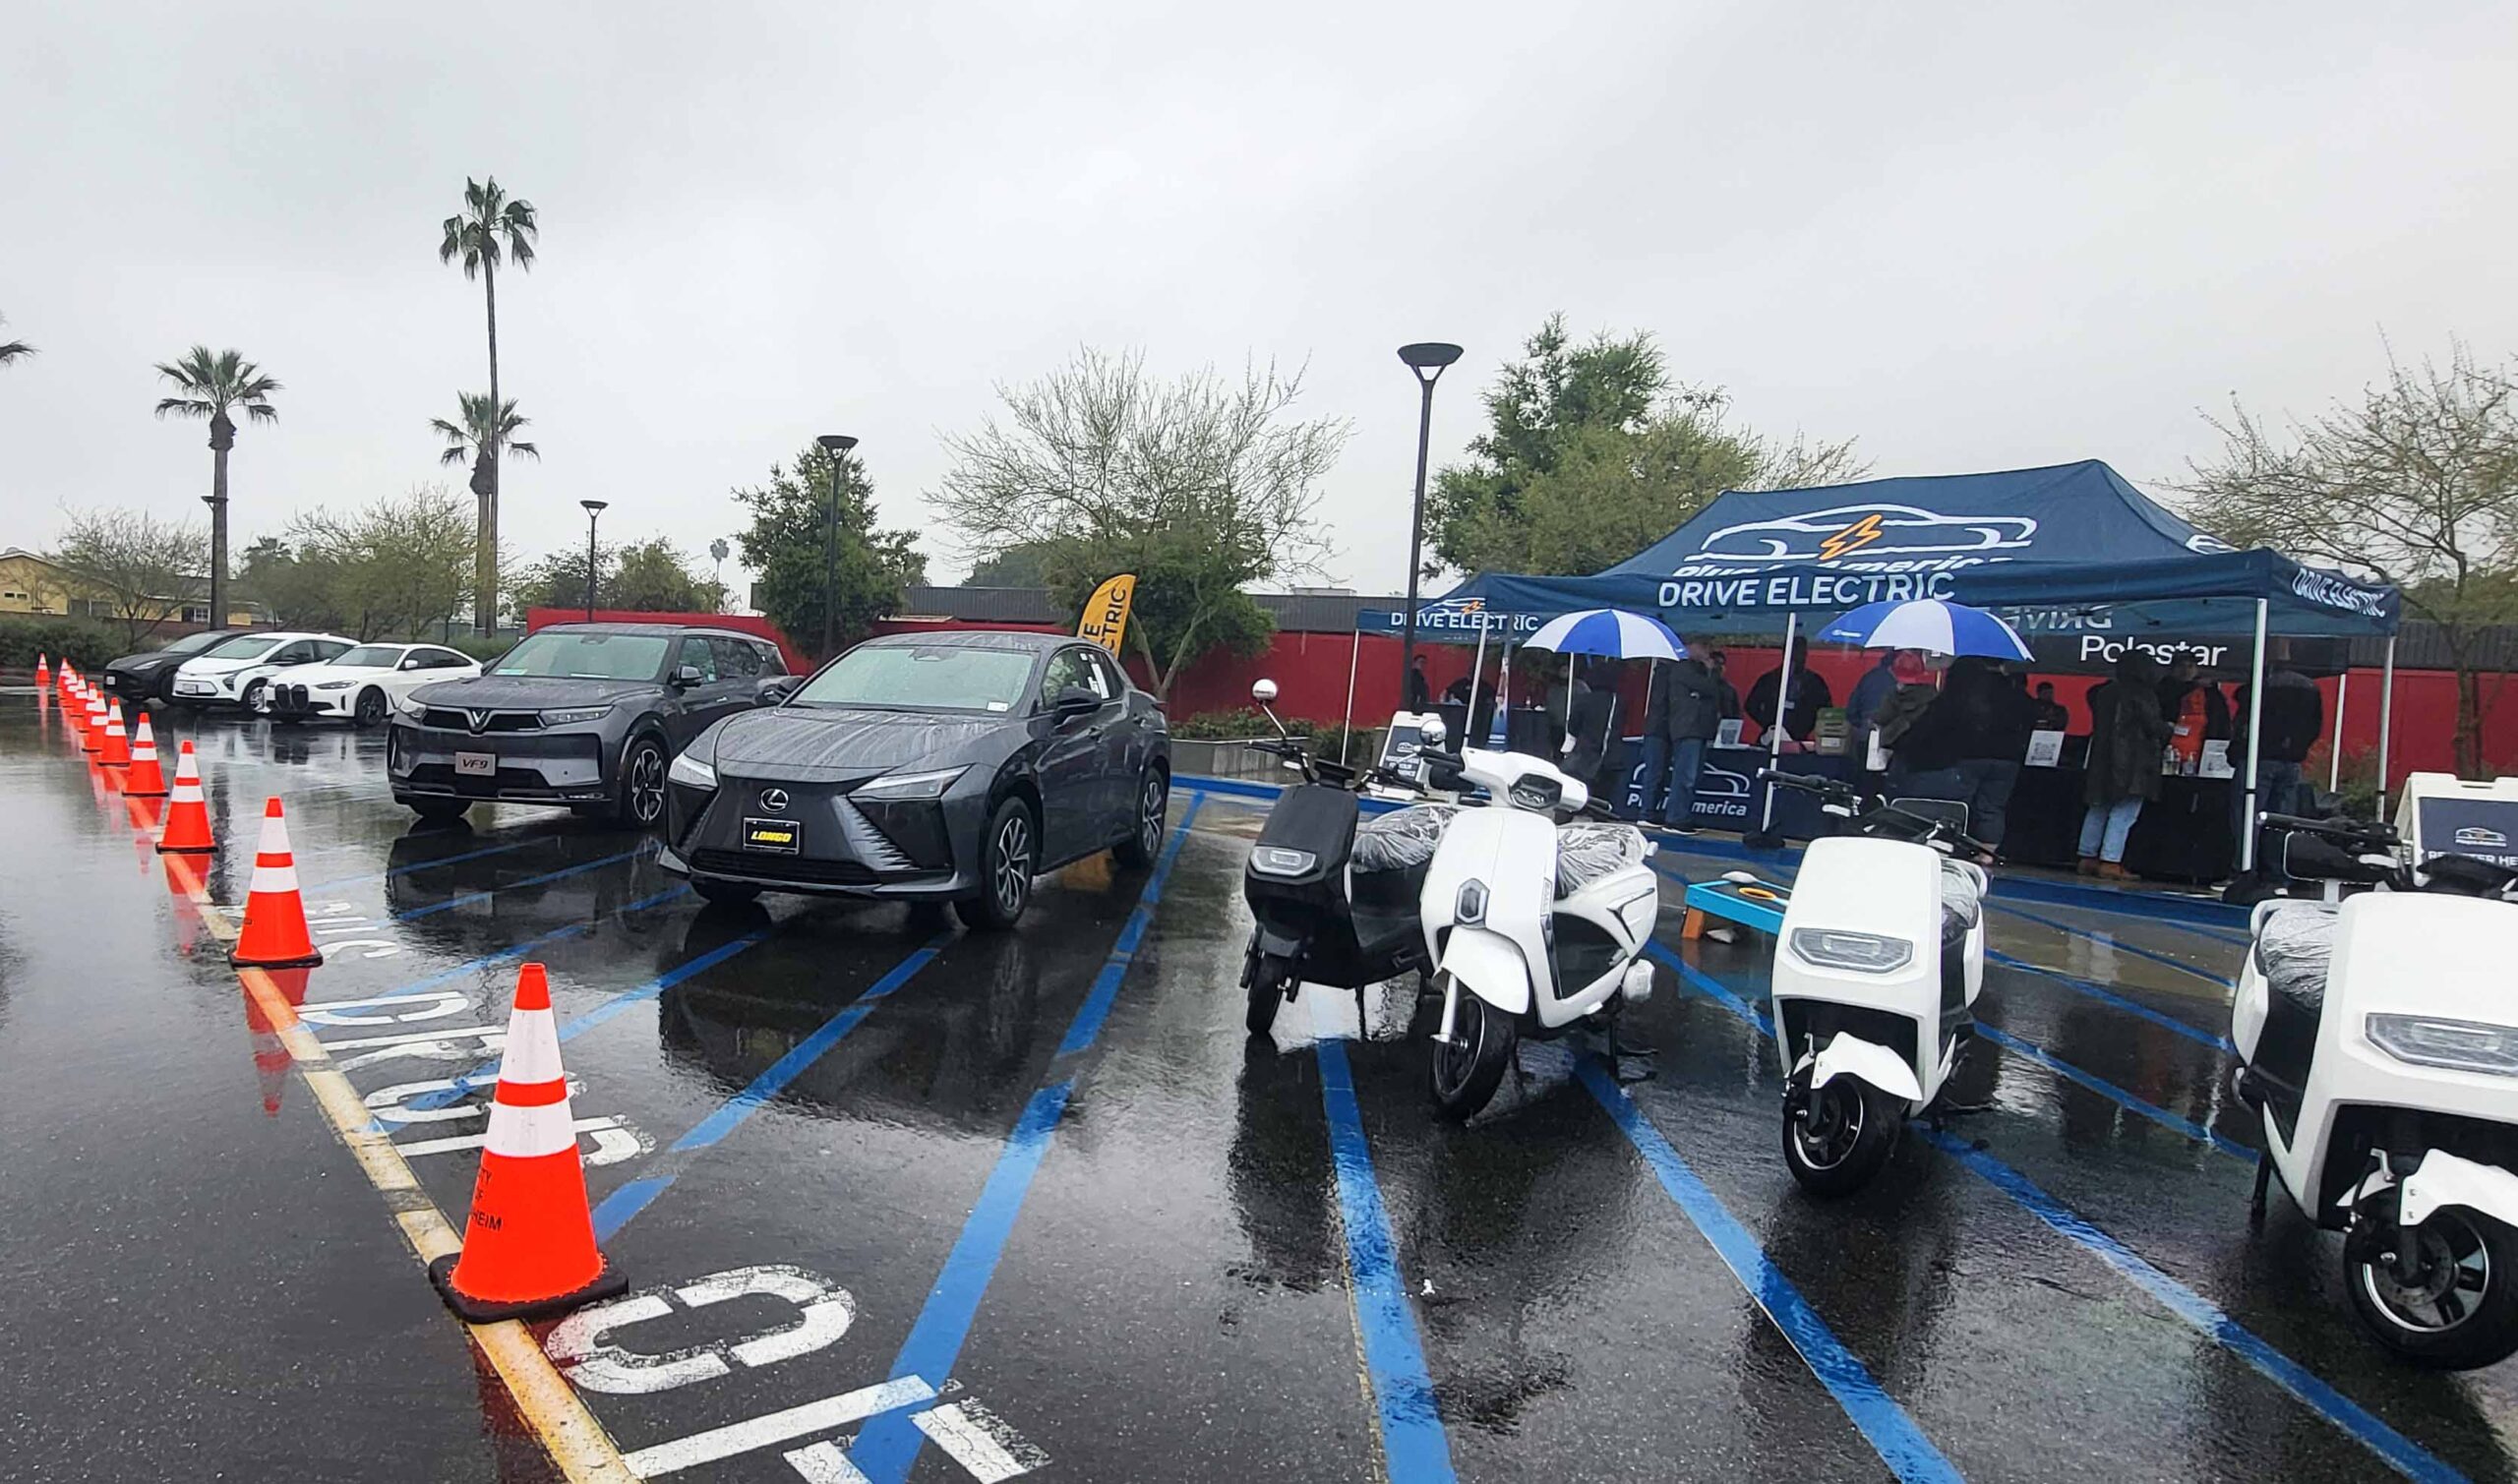 electric vehicles in a parking lot